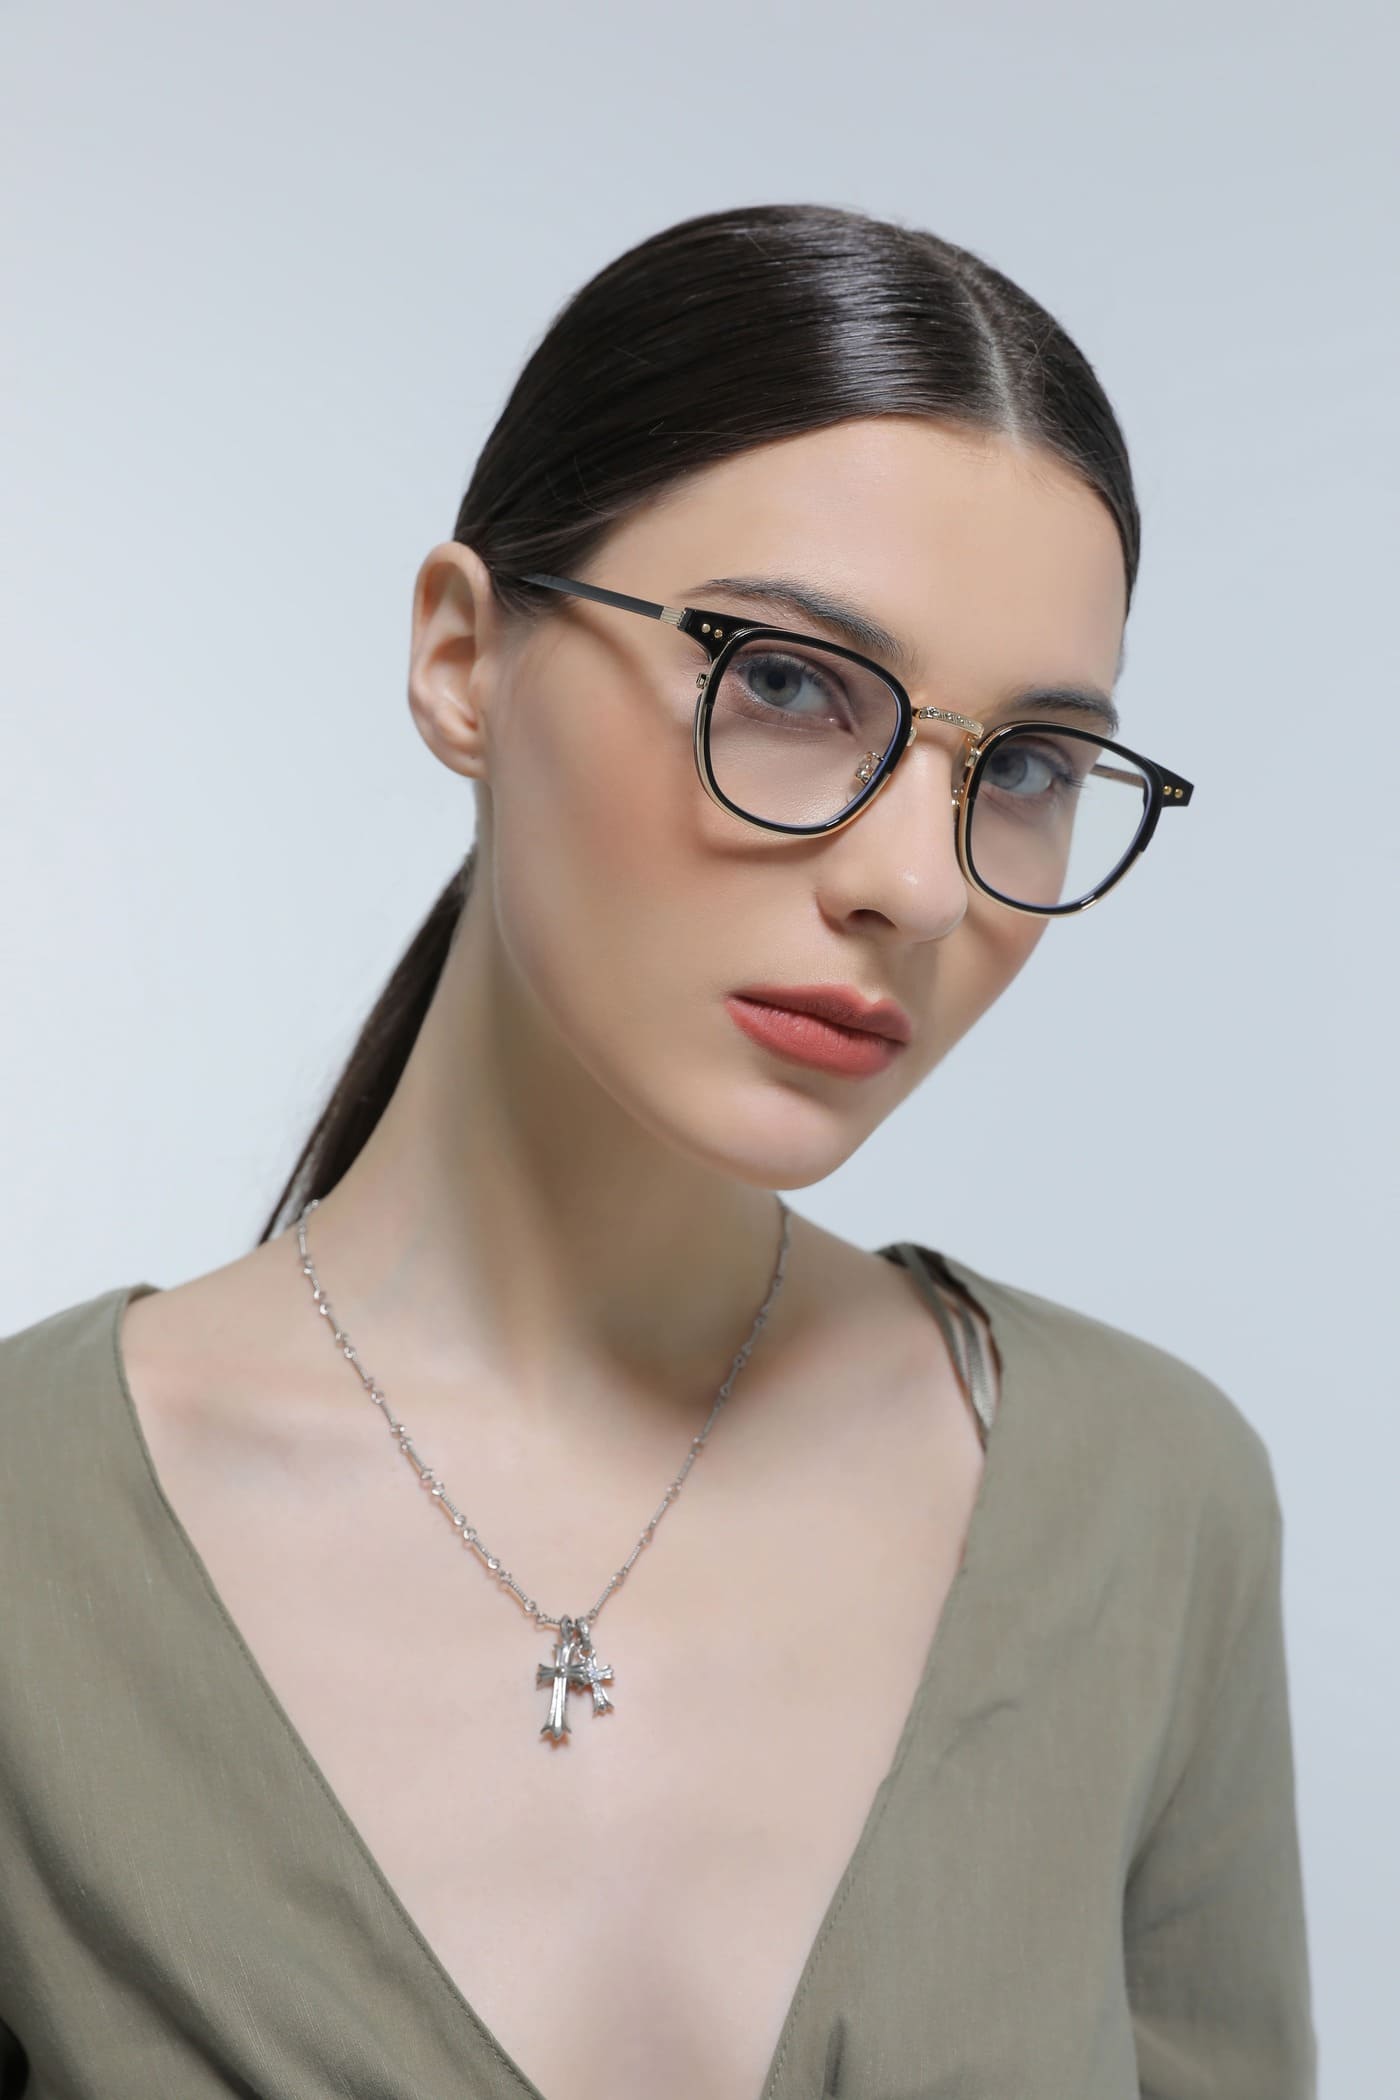 Discover a Spectrum of Stylish and High-Quality Eyewear at Giustizieri Vecchi